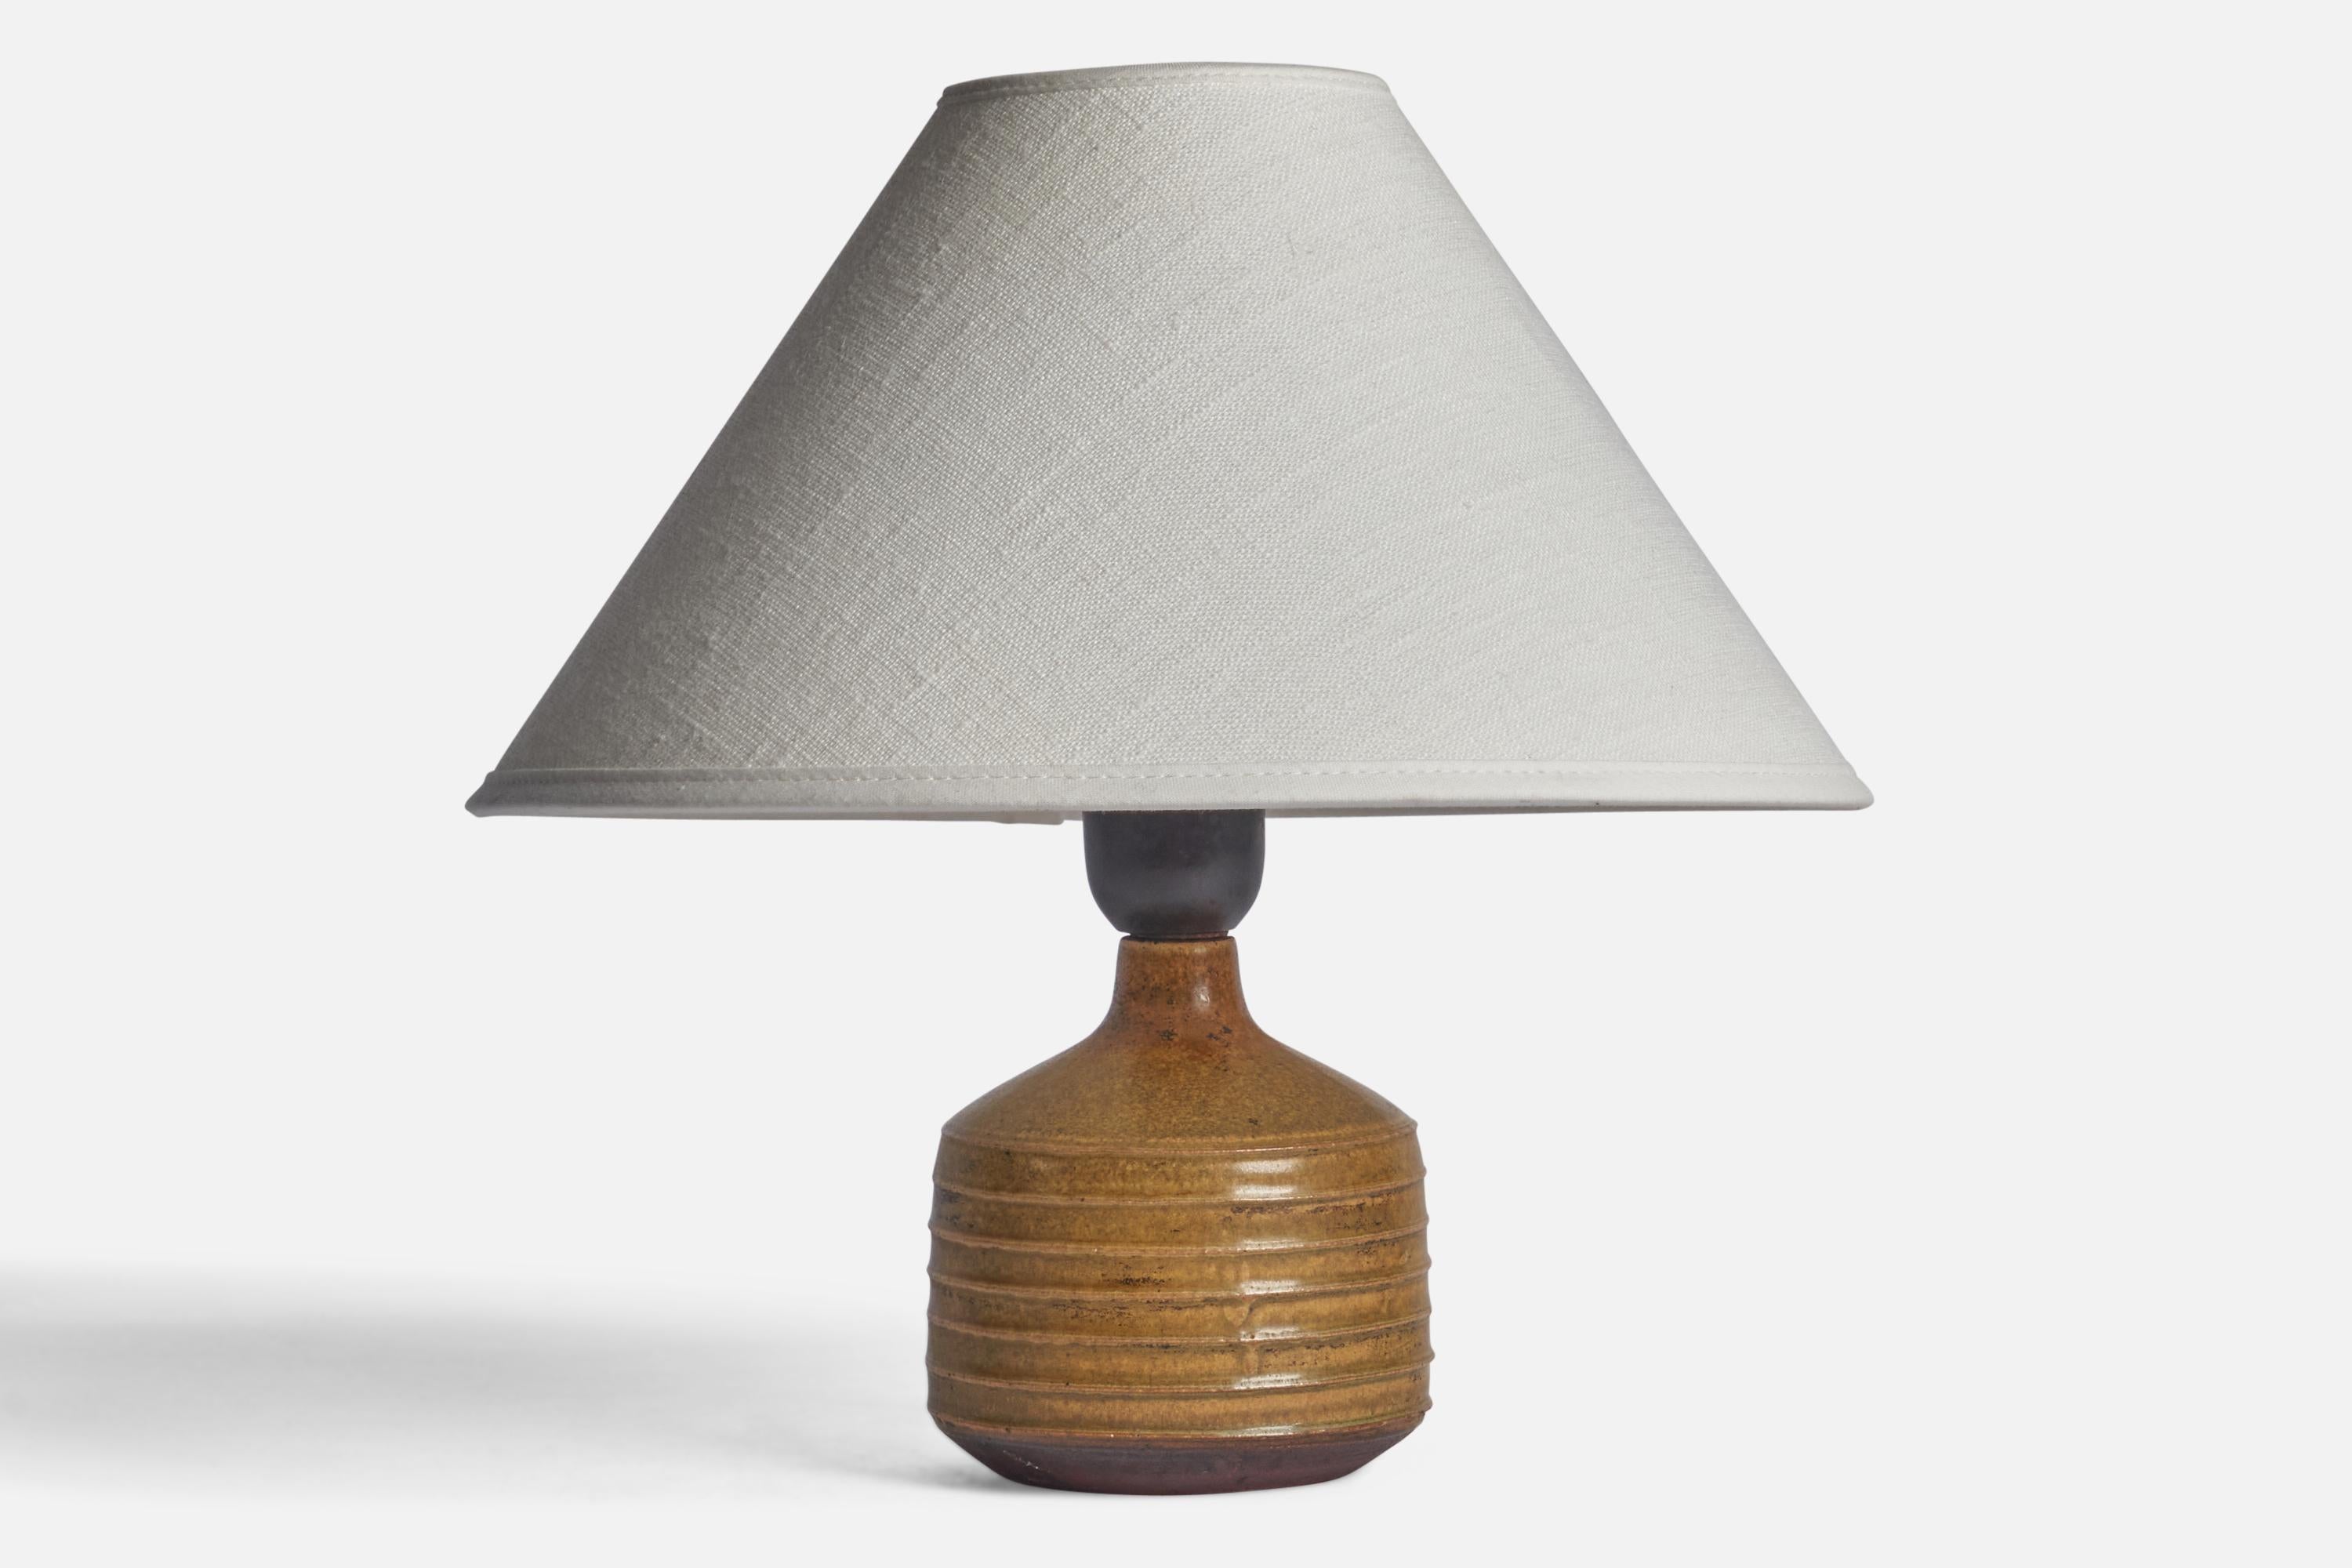 A small table lamp designed and produced by Rolf Palm, Mölle, Sweden, 1960s.

Dimensions of Lamp (inches): 7” H x 3.5” Diameter
Dimensions of Shade (inches): 2.5” Top Diameter x 10” Bottom Diameter x 5.5